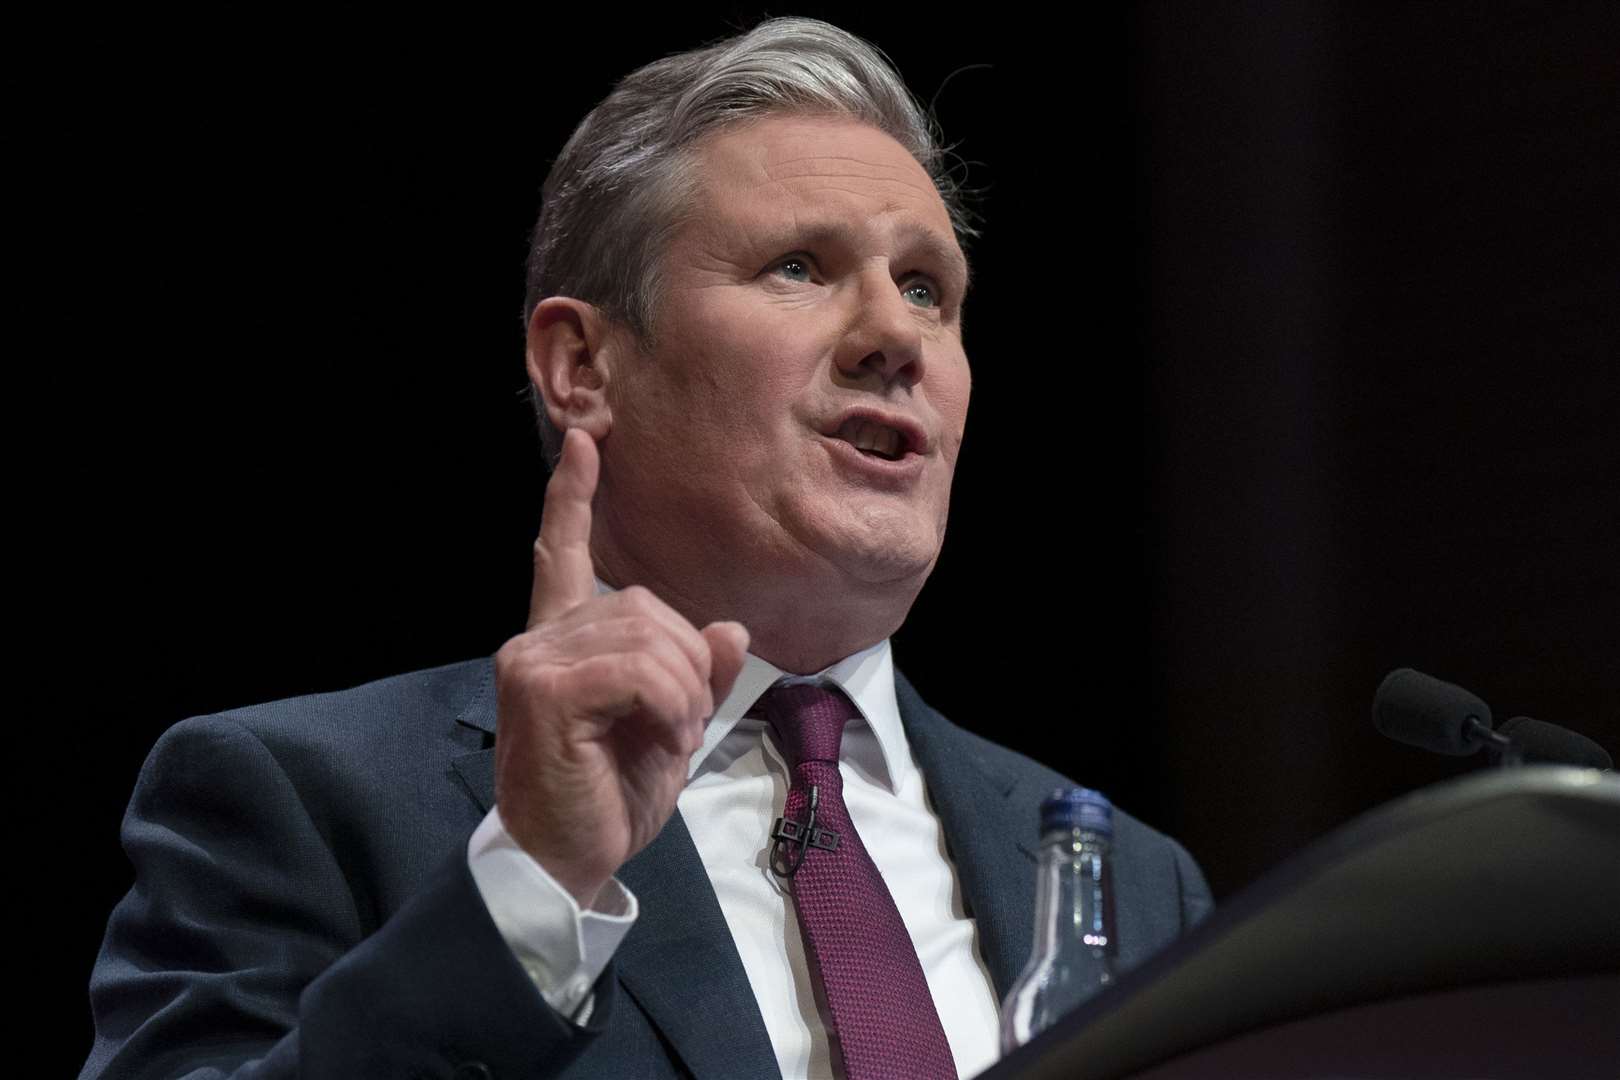 Labour leader Sir Keir Starmer called for a ‘ceasefire that lasts’ in the Middle East while speaking in Glasgow (Jane Barlow/PA)